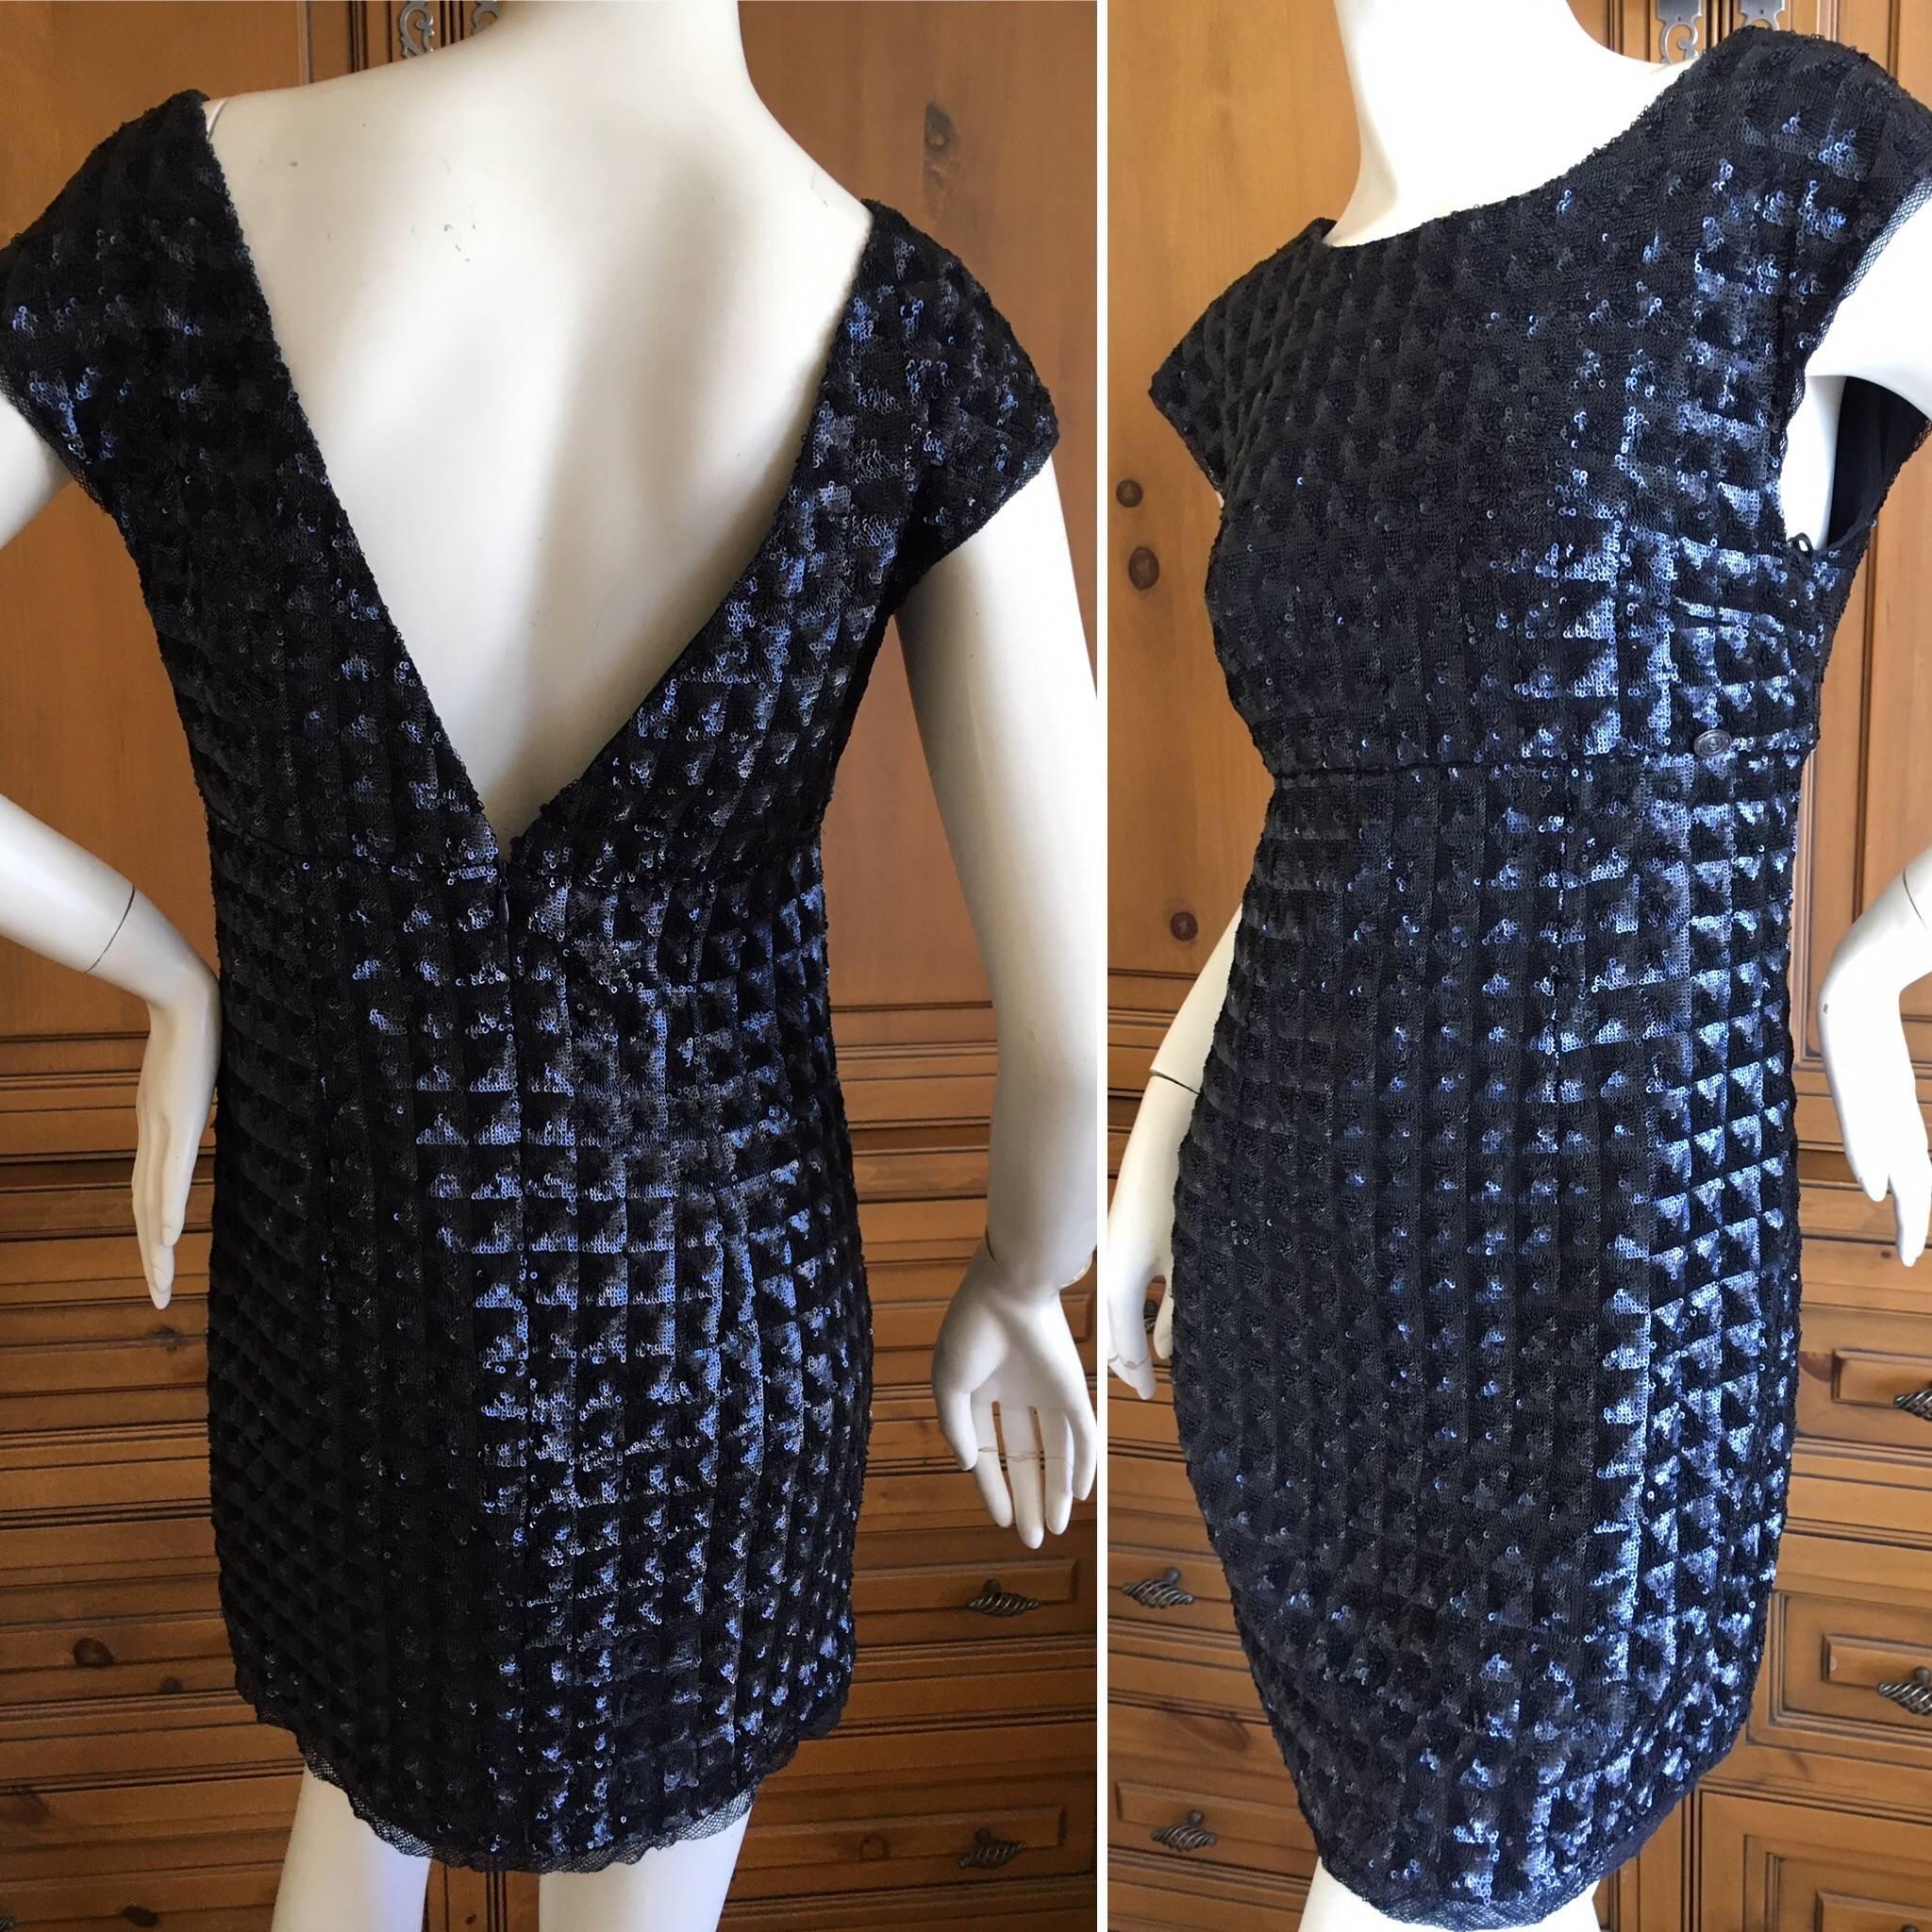 Wonderful navy blue sequin mini dress with deep see back.
Completely embellished with navy blue sequins in quilted pattern.
Size 36
 Bust 36" 
Waist 30" 
Hips 40"
Length 31"  
Excellent pre owned condition
